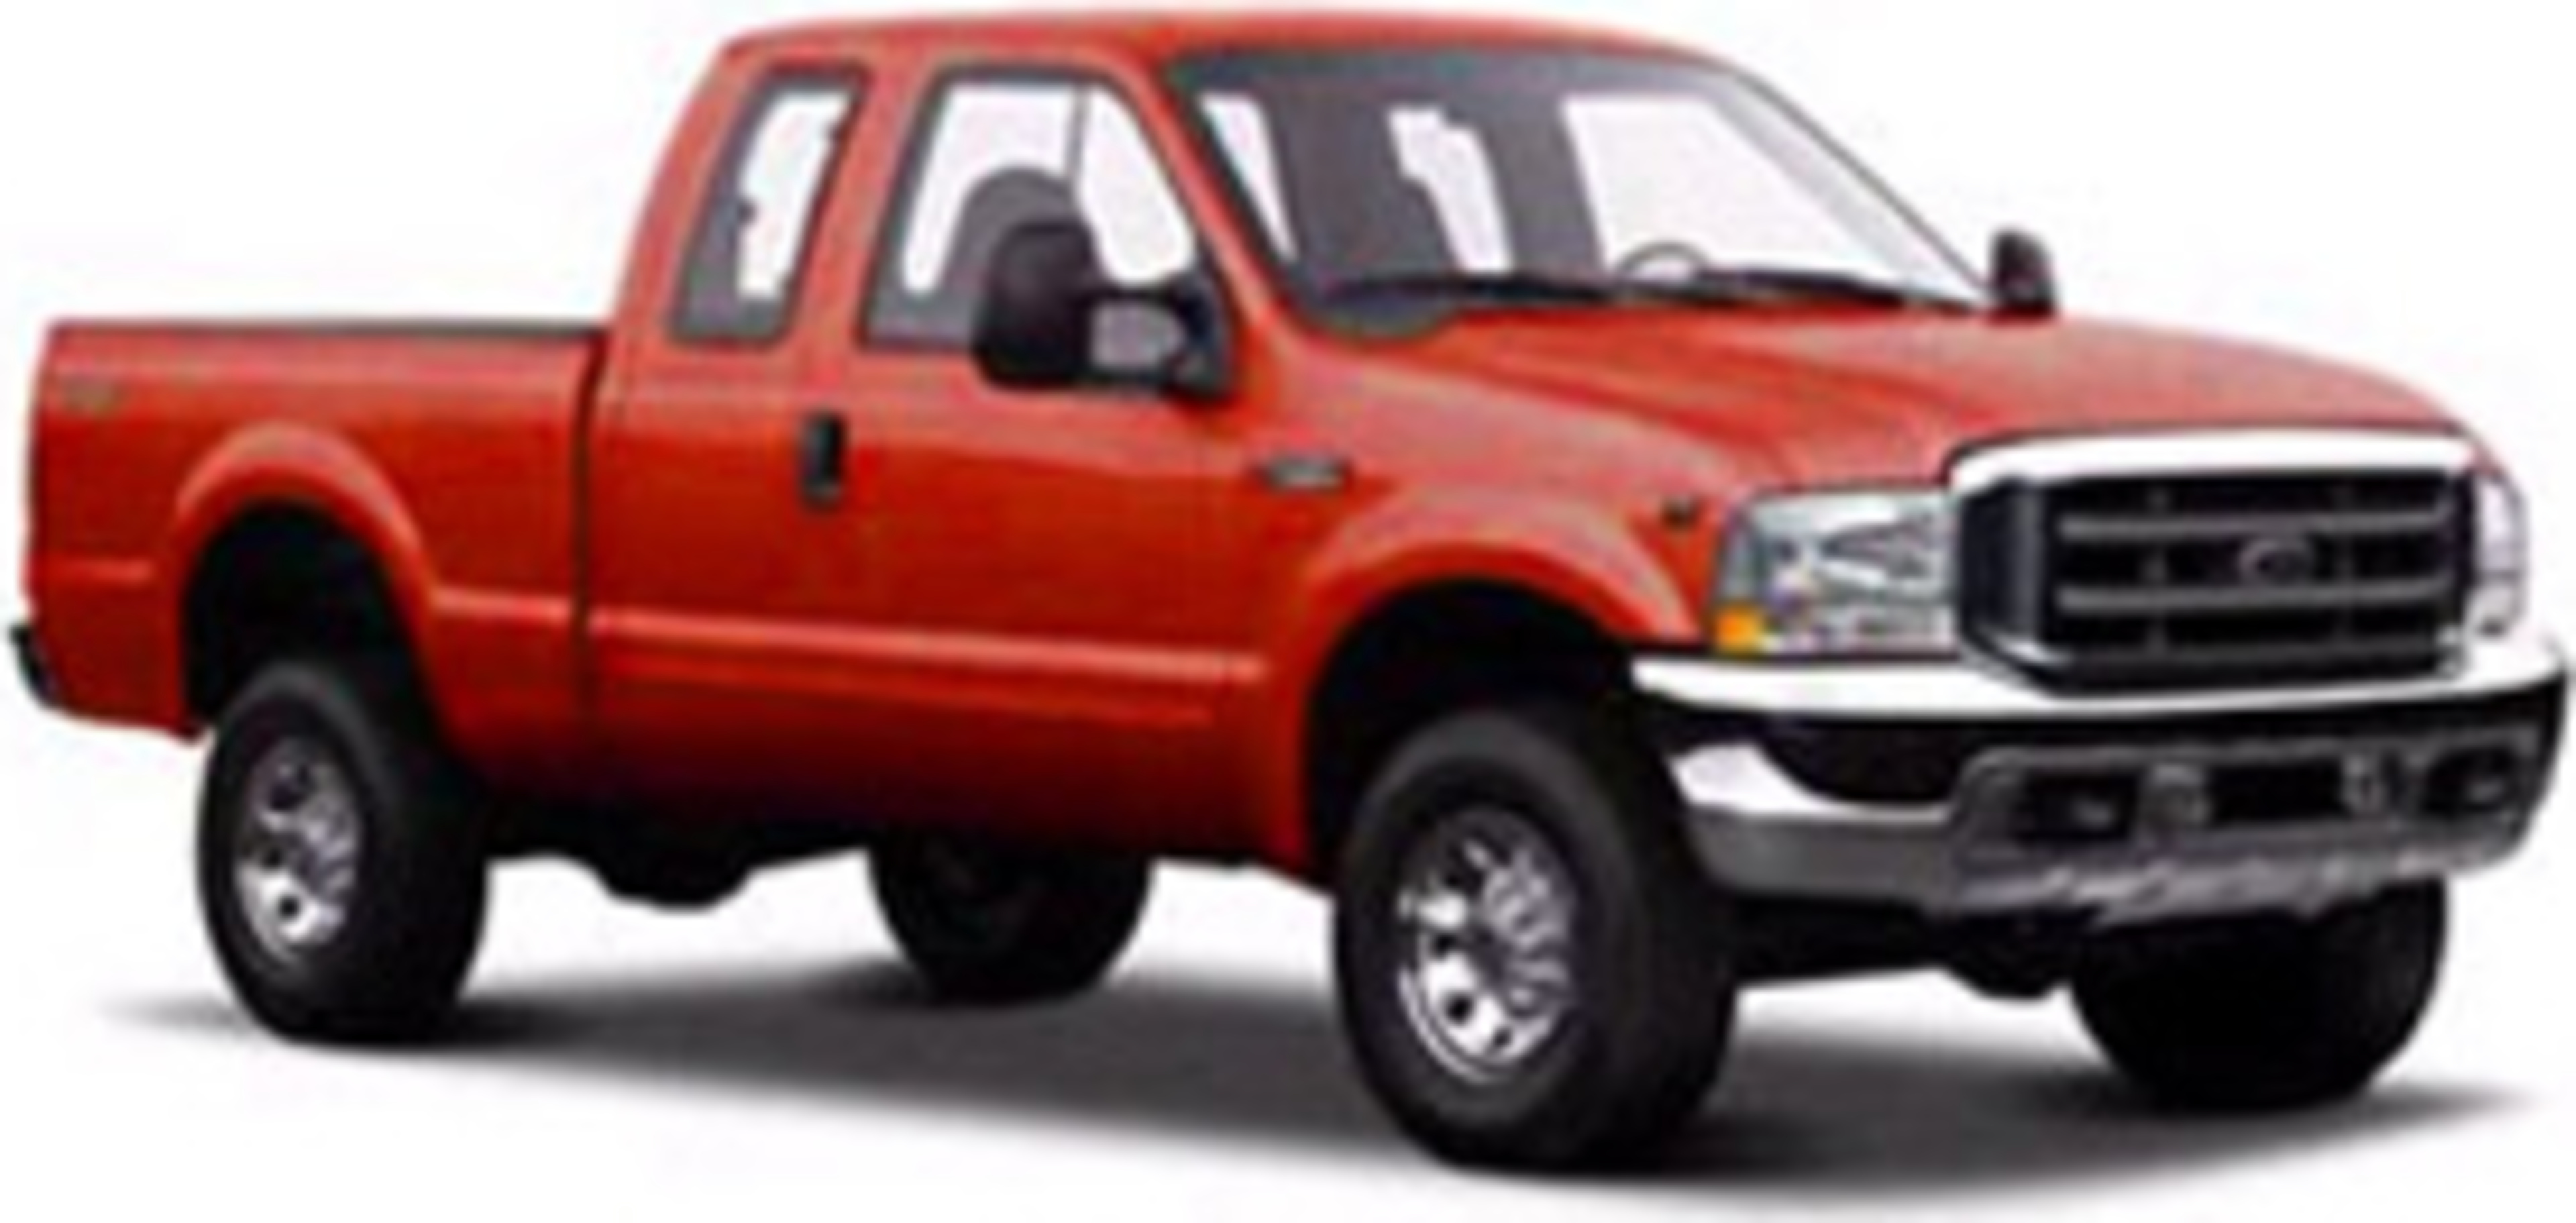 2002 Ford F-250 Super Duty Service and Repair Manual